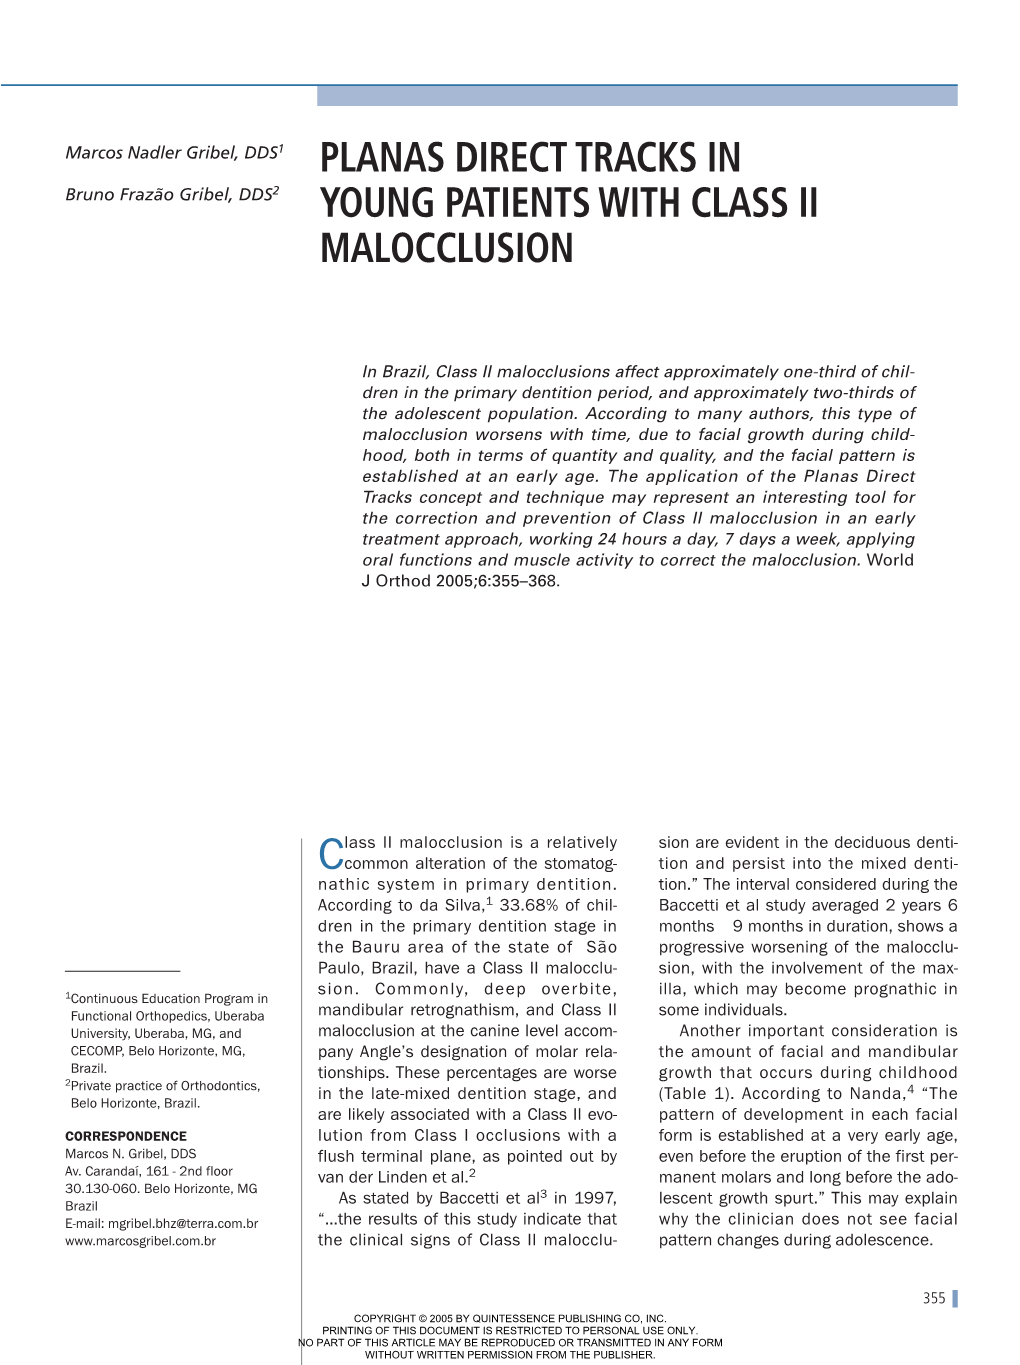 Planas Direct Tracks in Young Patients with Class Ii